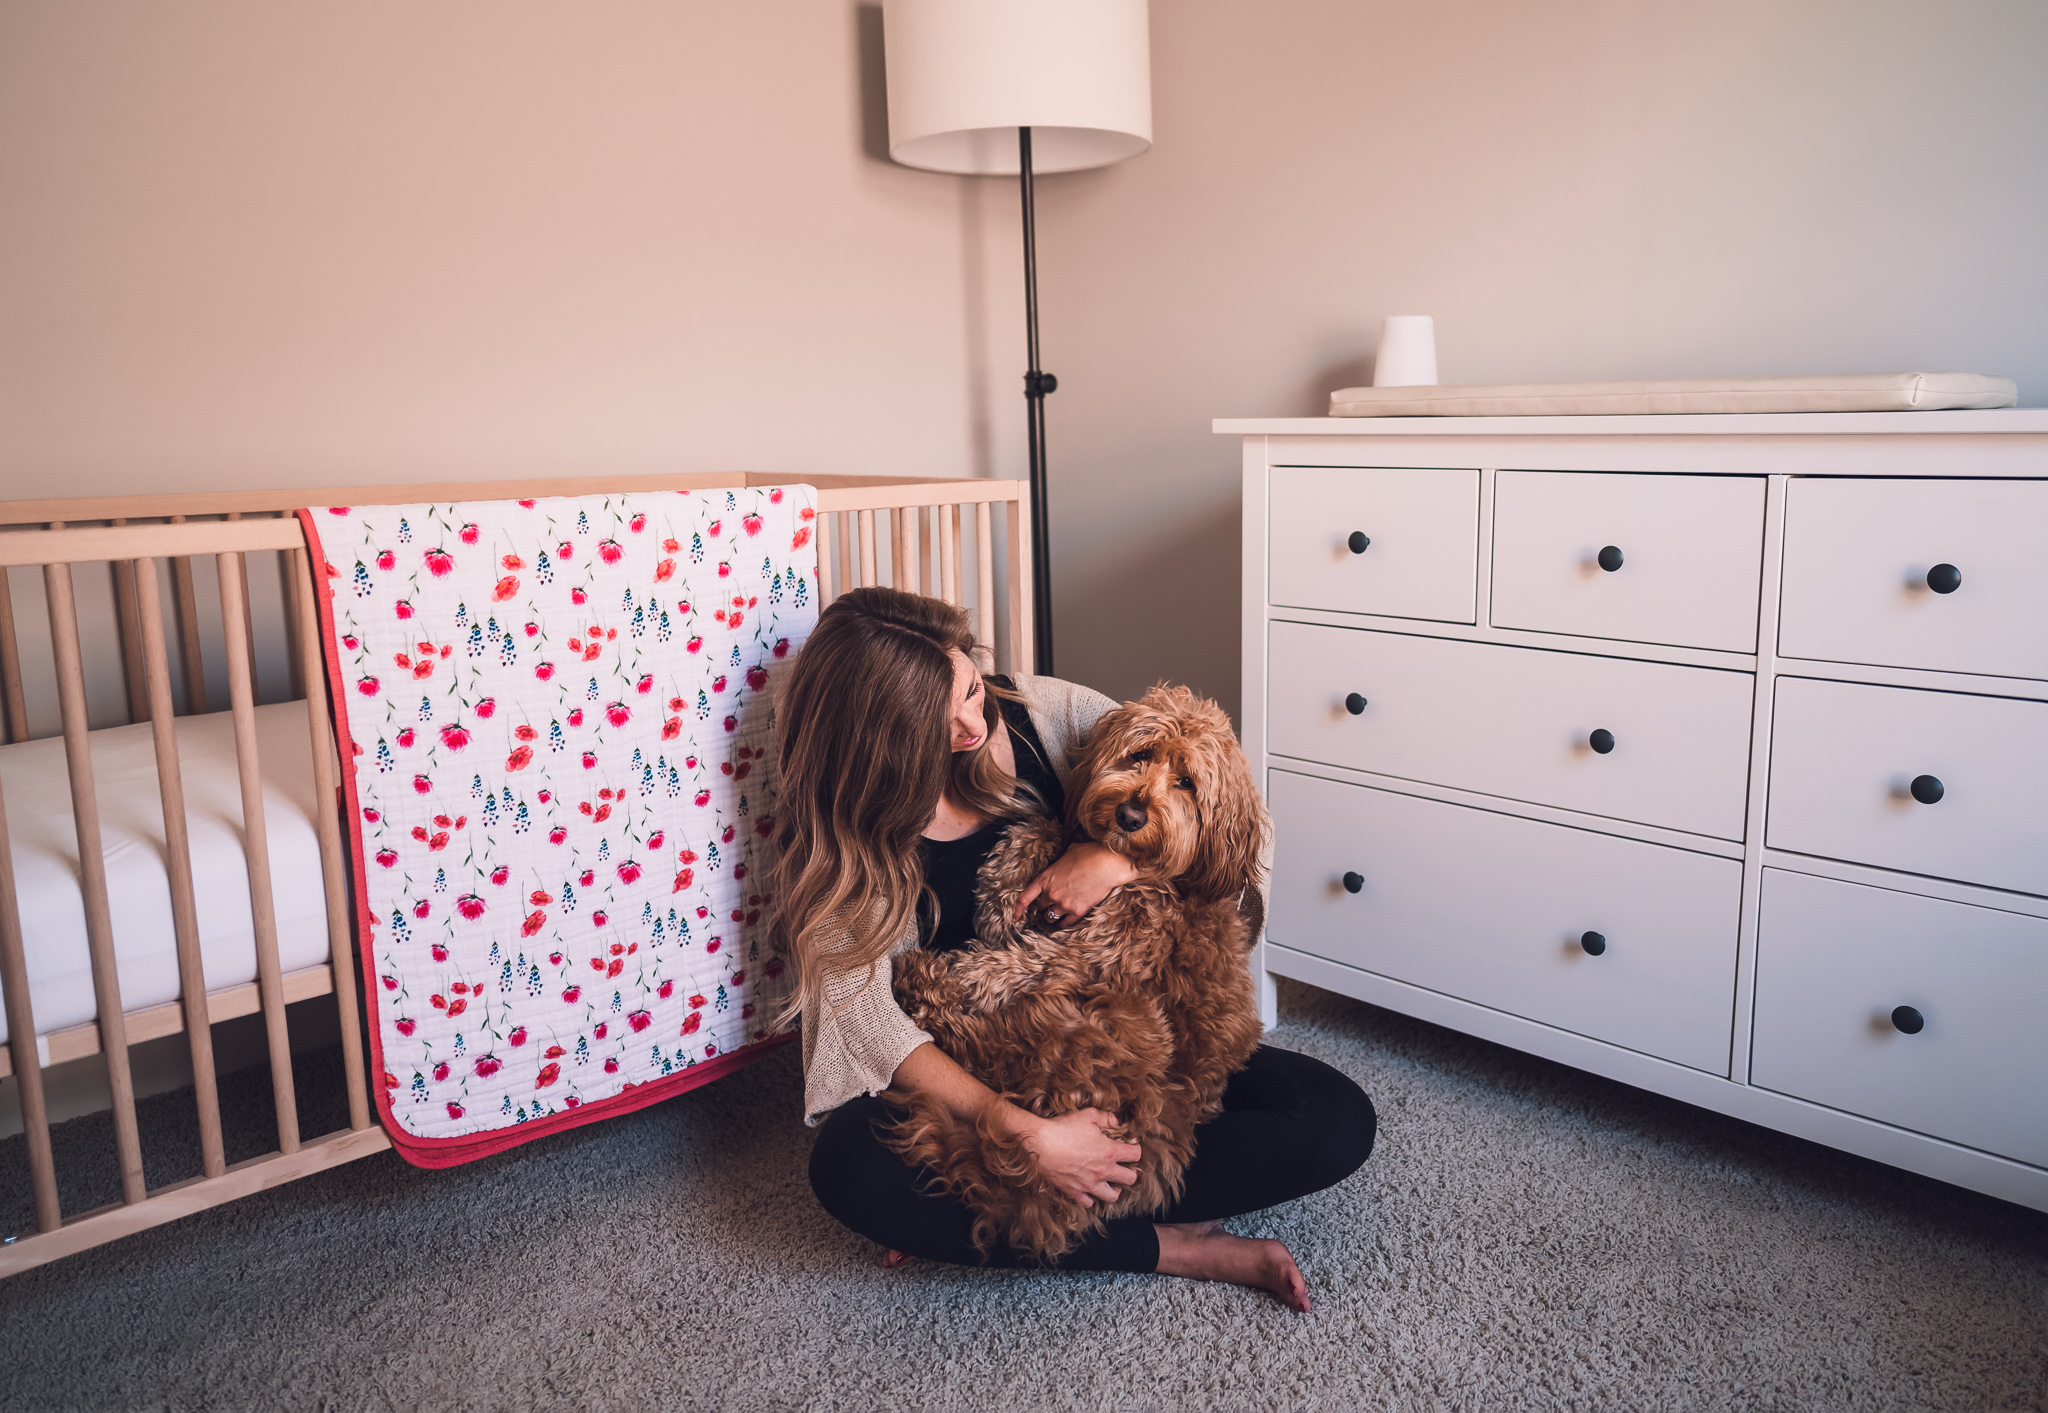 In-home maternity photography session with dog